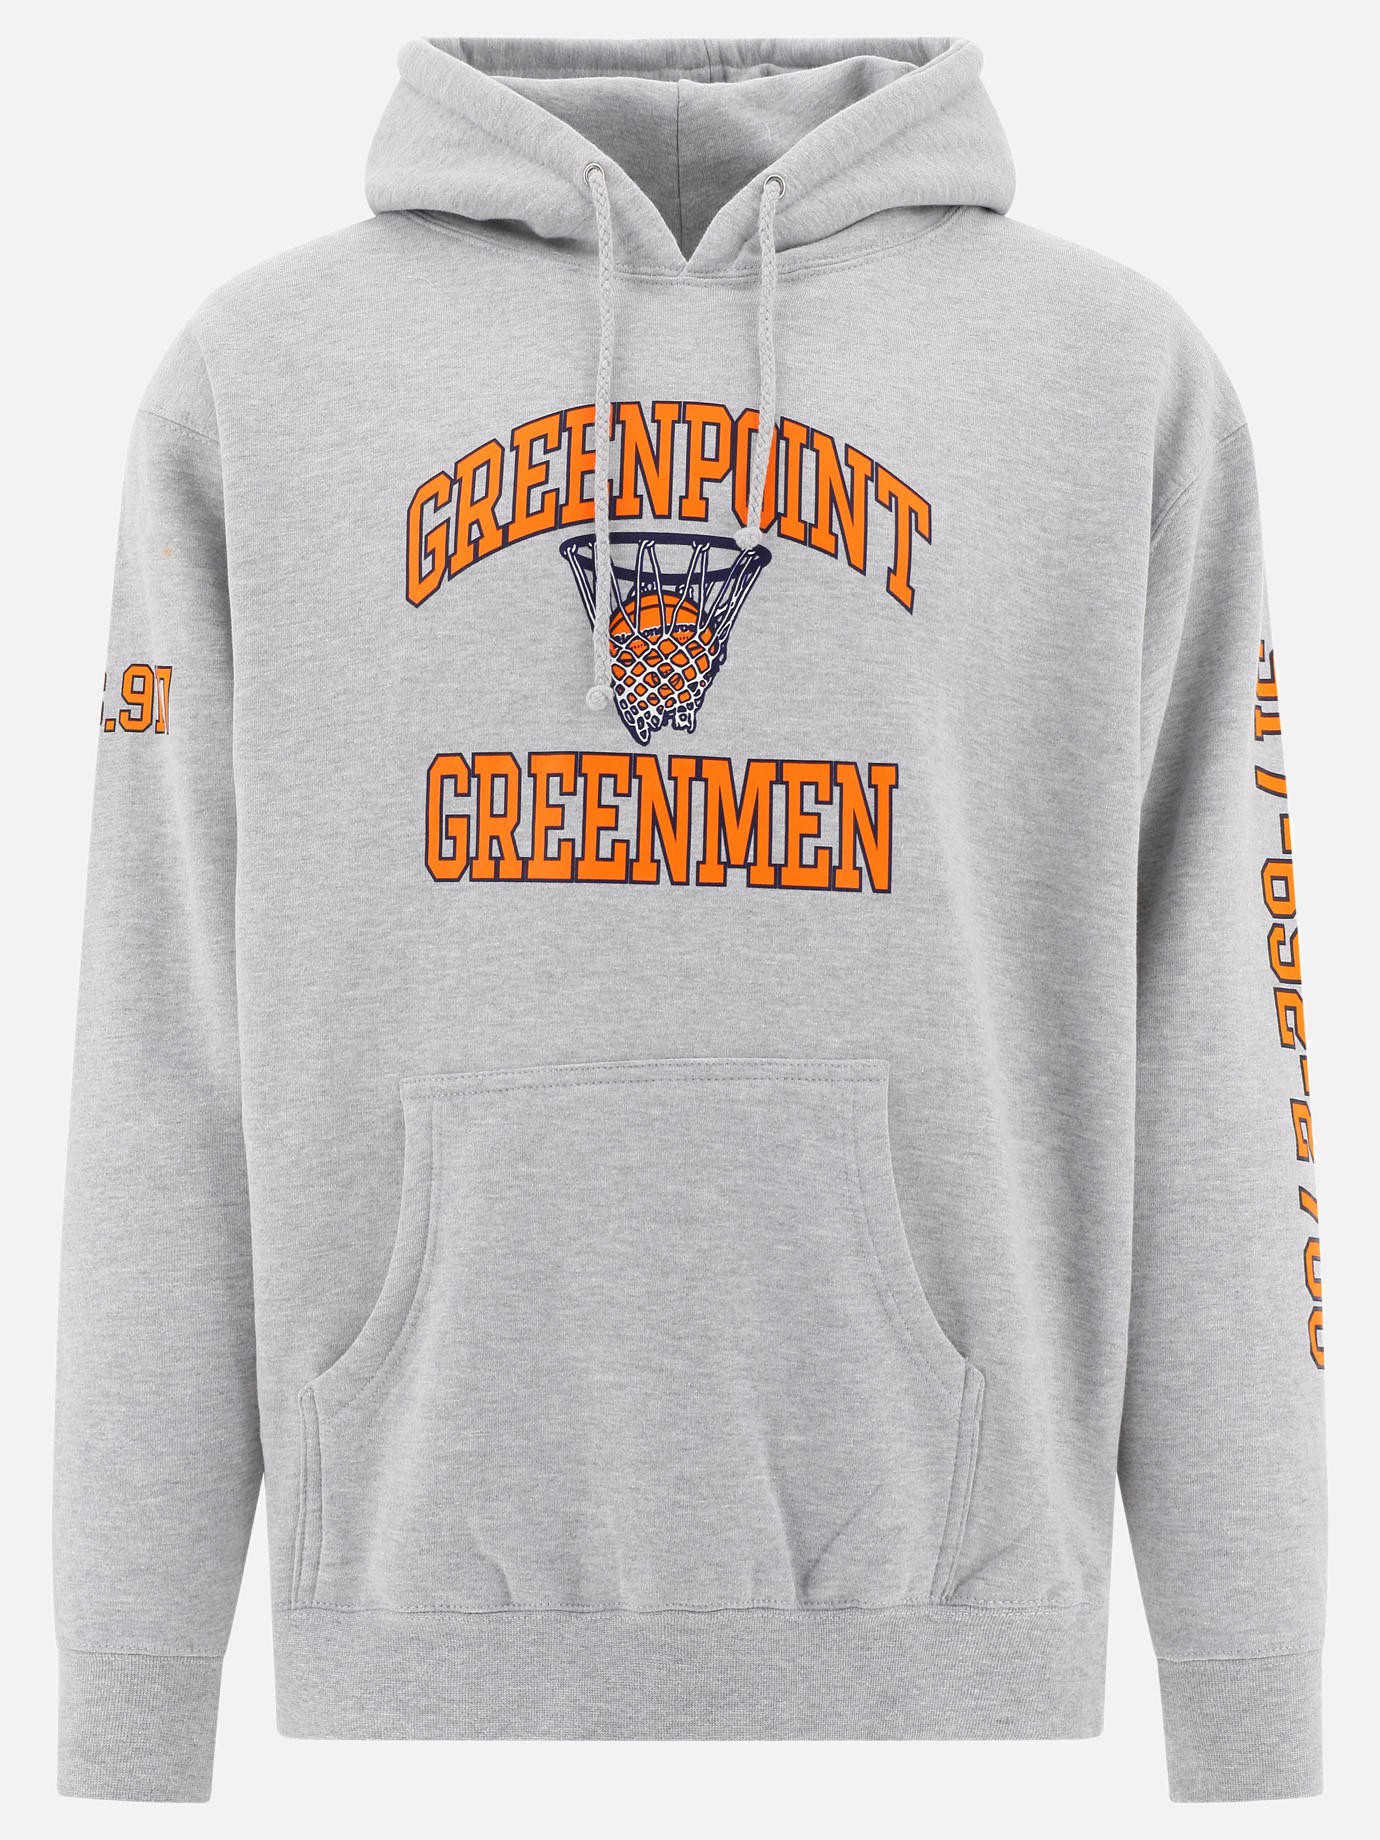  Greenpoint  hoodieby Call Me 917 - 0